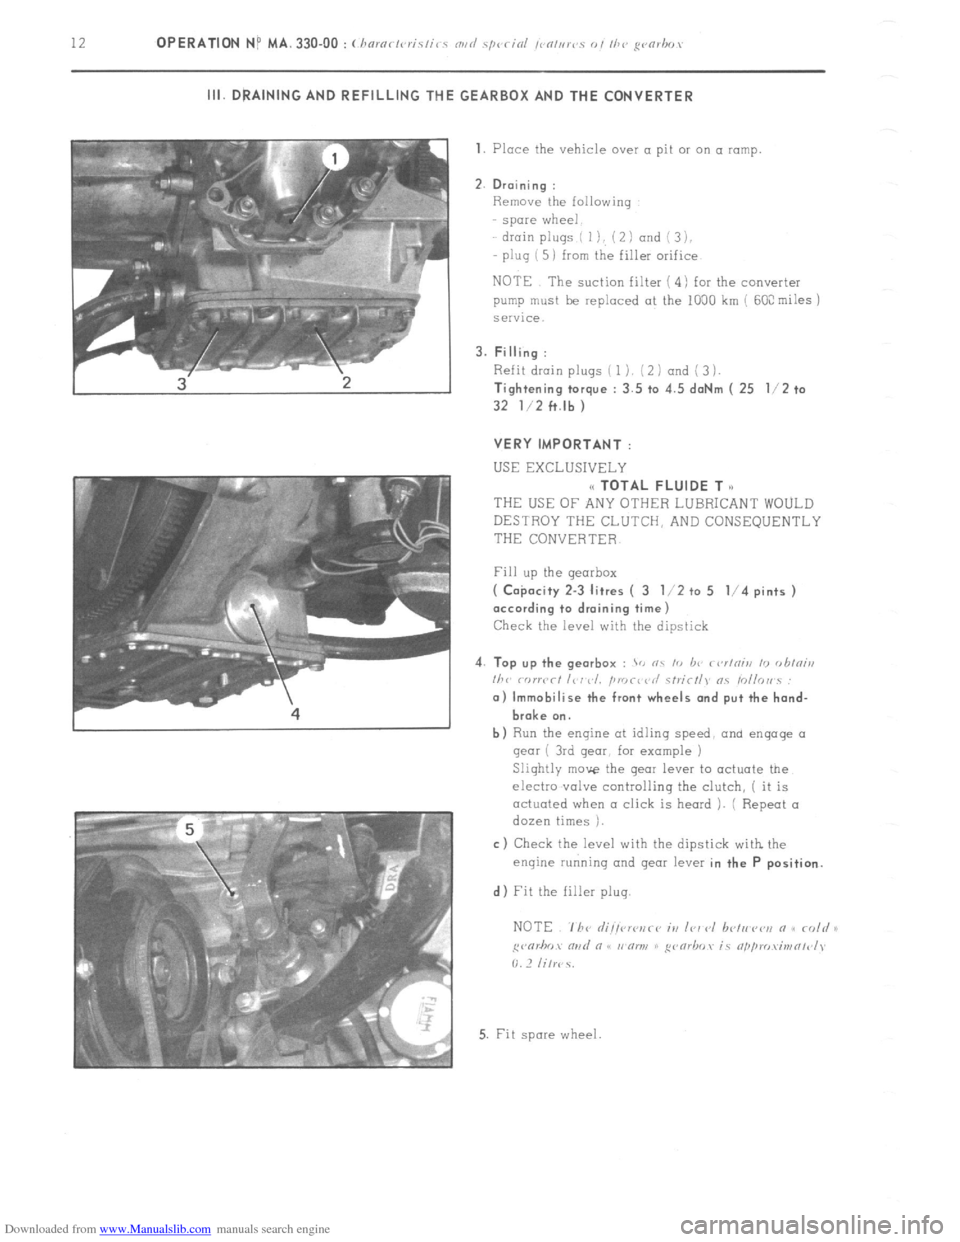 Citroen CX 1980 1.G Workshop Manual Downloaded from www.Manualslib.com manuals search engine 12 OPERATION NP MA. 330.00 : (haro</vr-is/i< c m,</ s/wcinl ,cn,i,rt~. o, I/>? gvmhr,, III. DRAINING AND REFILLING THE GEARBOX AND THE CONVERTE